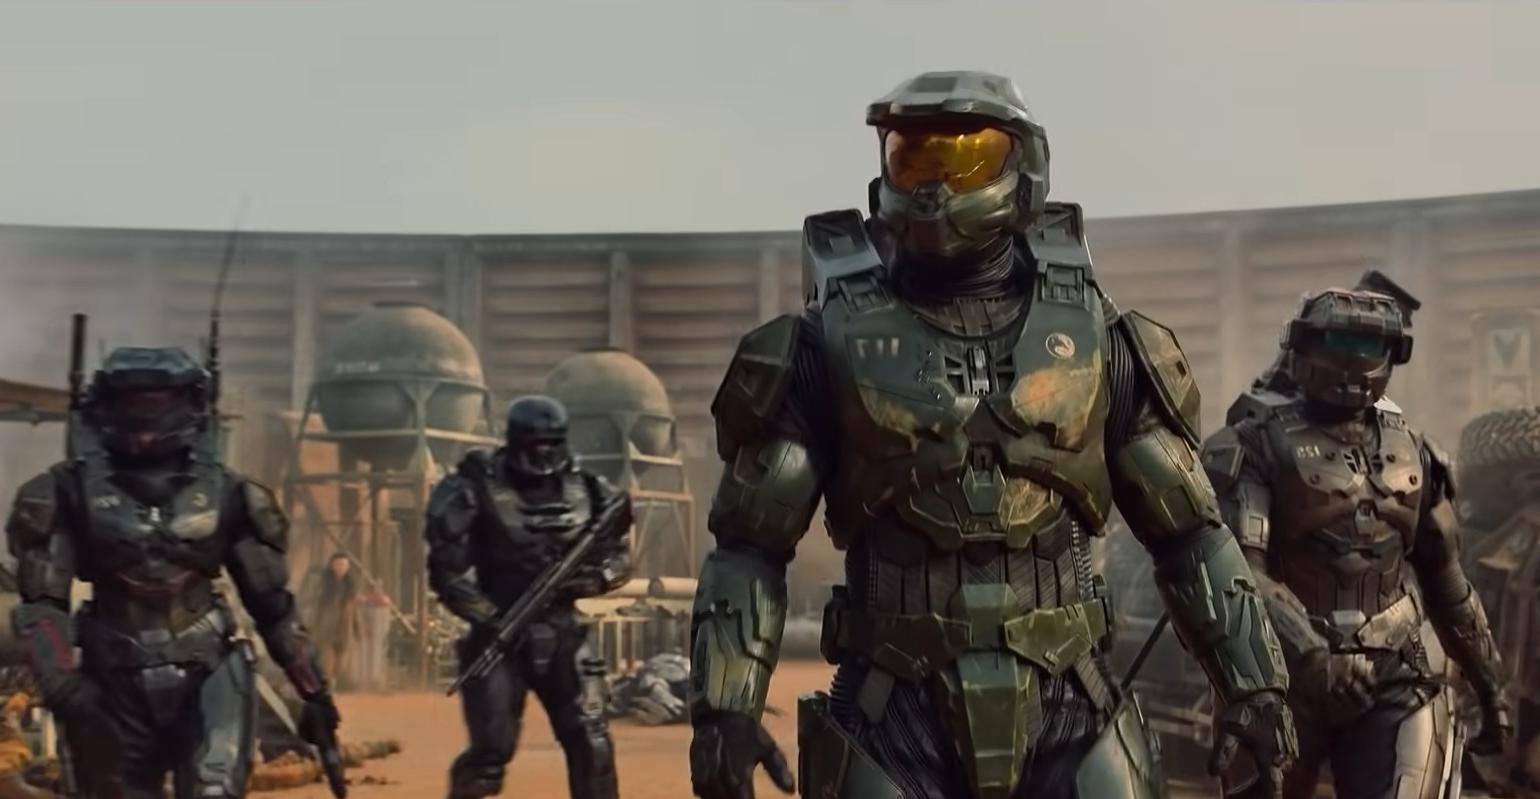 Halo TV series early review: 2 premiere episodes are an intriguing